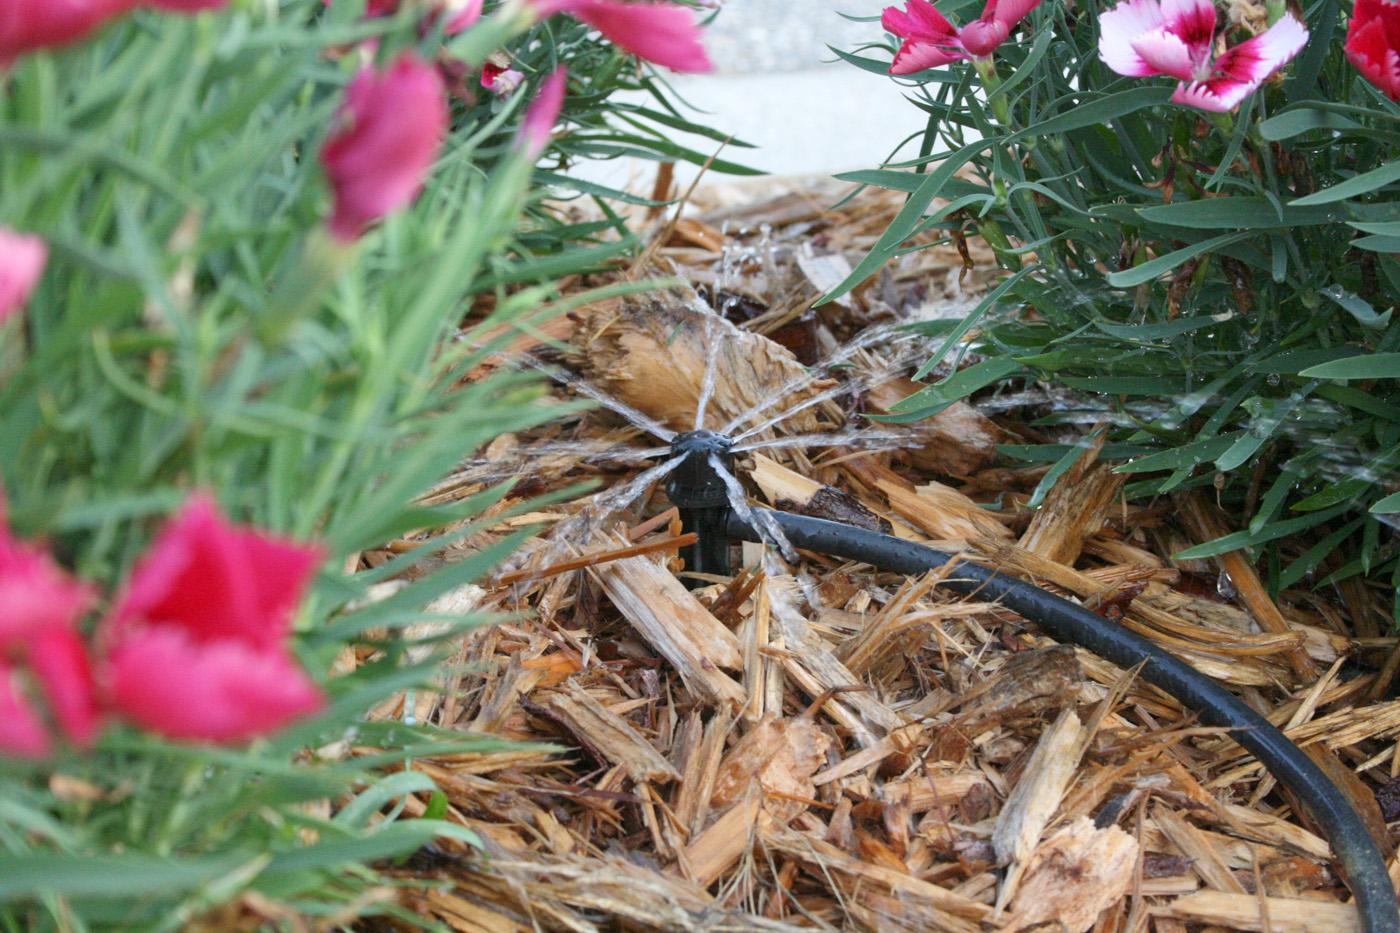 Micro-irrigation systems, such as this sprinkler watering Telstar dianthus, supply water directly to the soil around the plants. (Photo by Gary Bachman)